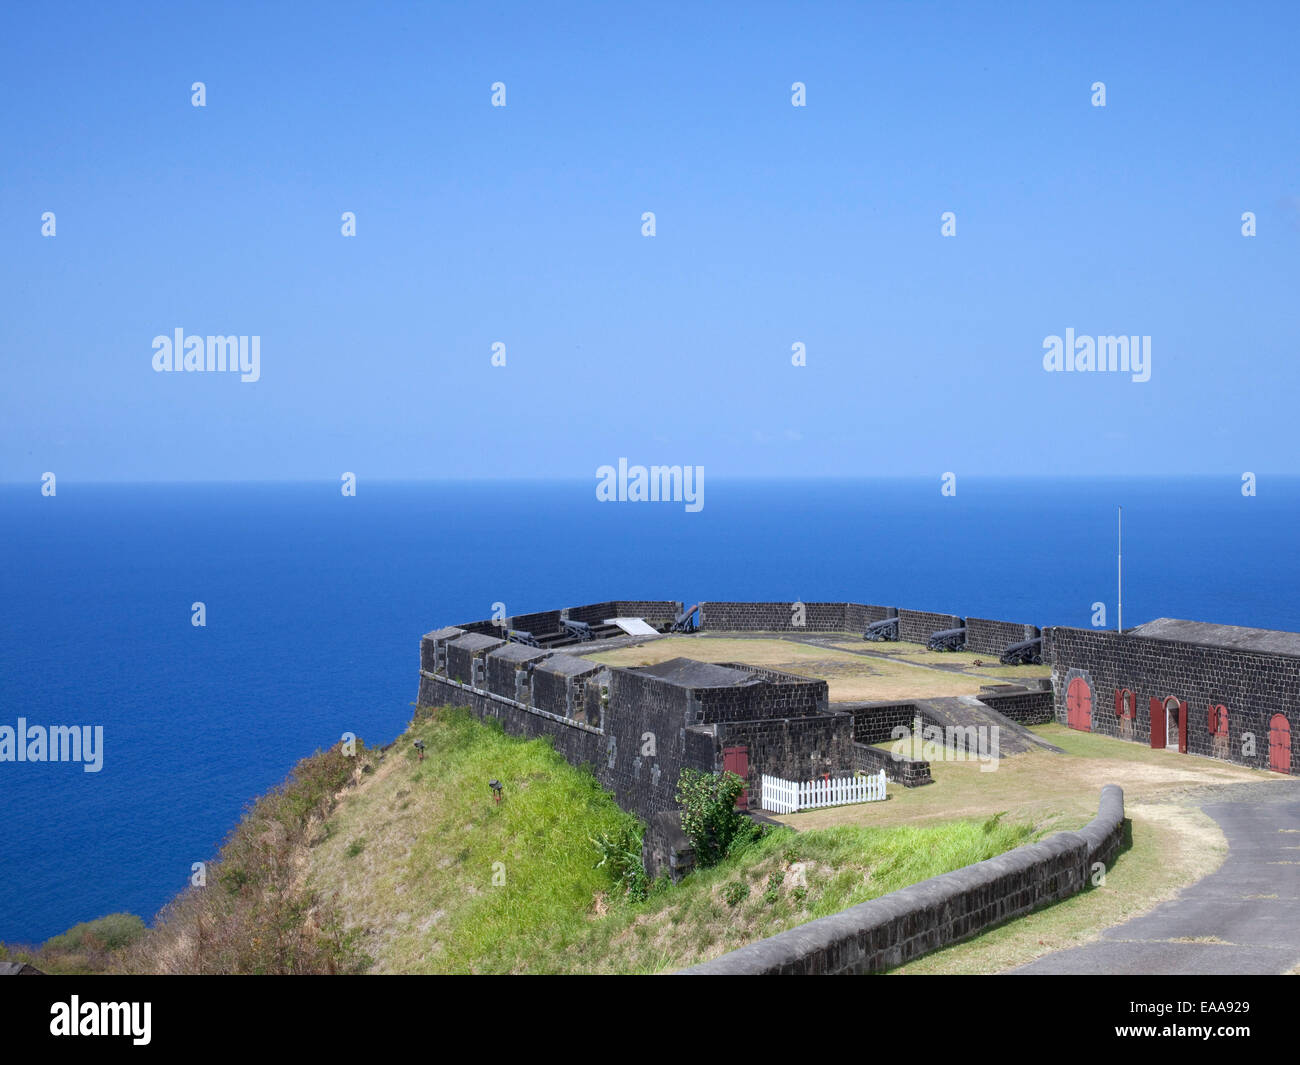 Brimstone Hill Fortress National Park overlooking the Caribbean Sea Stock Photo